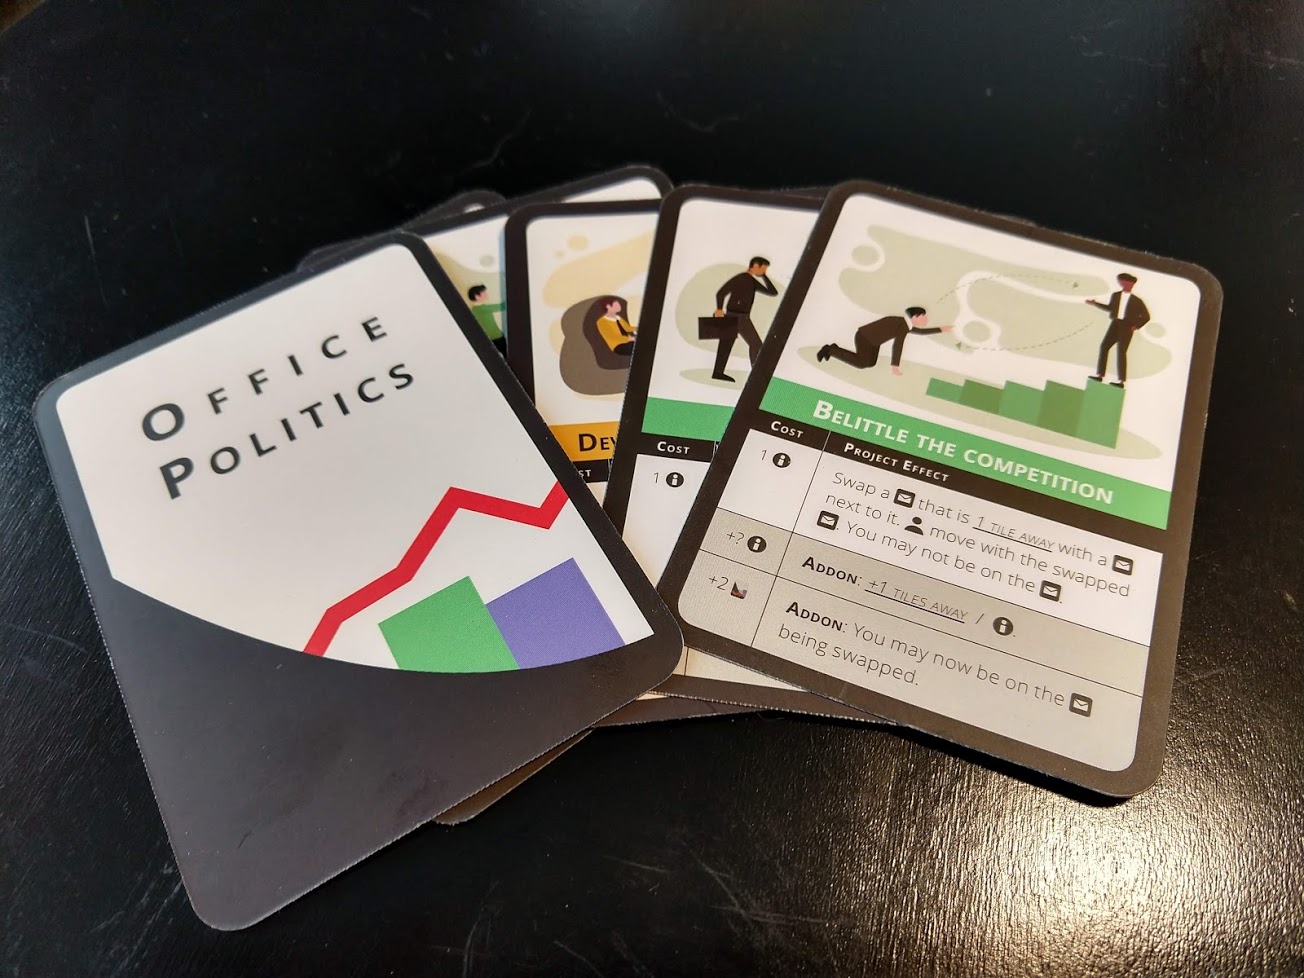 A series on introducing the Office Politics cards!